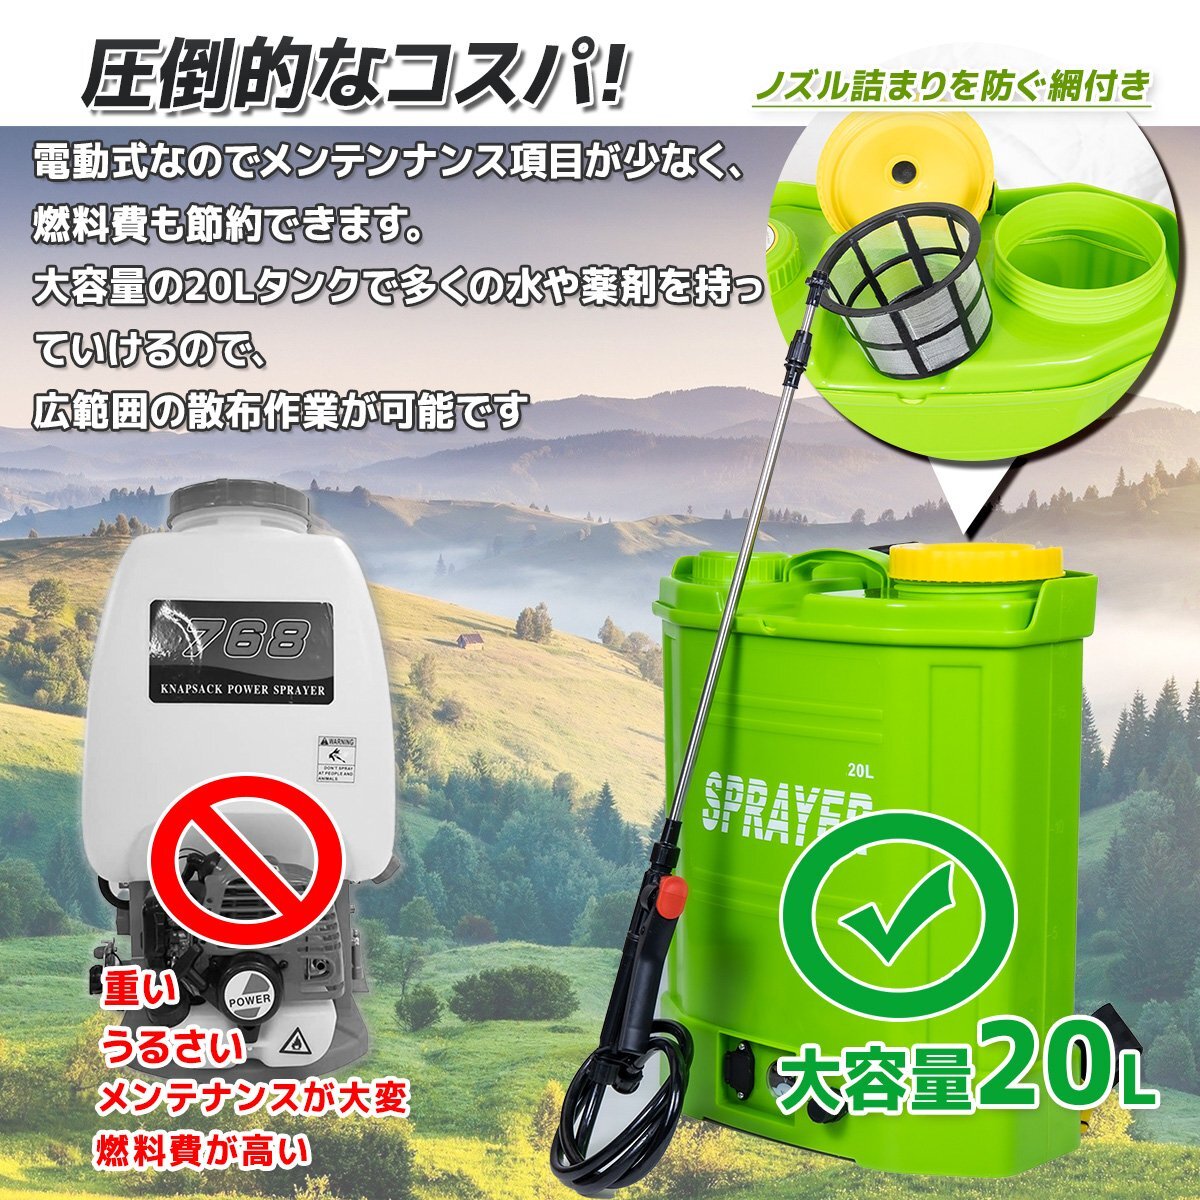 [ free shipping ]Myprecious regular goods # rechargeable electric sprayer back pack type tanker capacity 20L 5 kind. ... nozzle attaching * family power supply OK!B-type